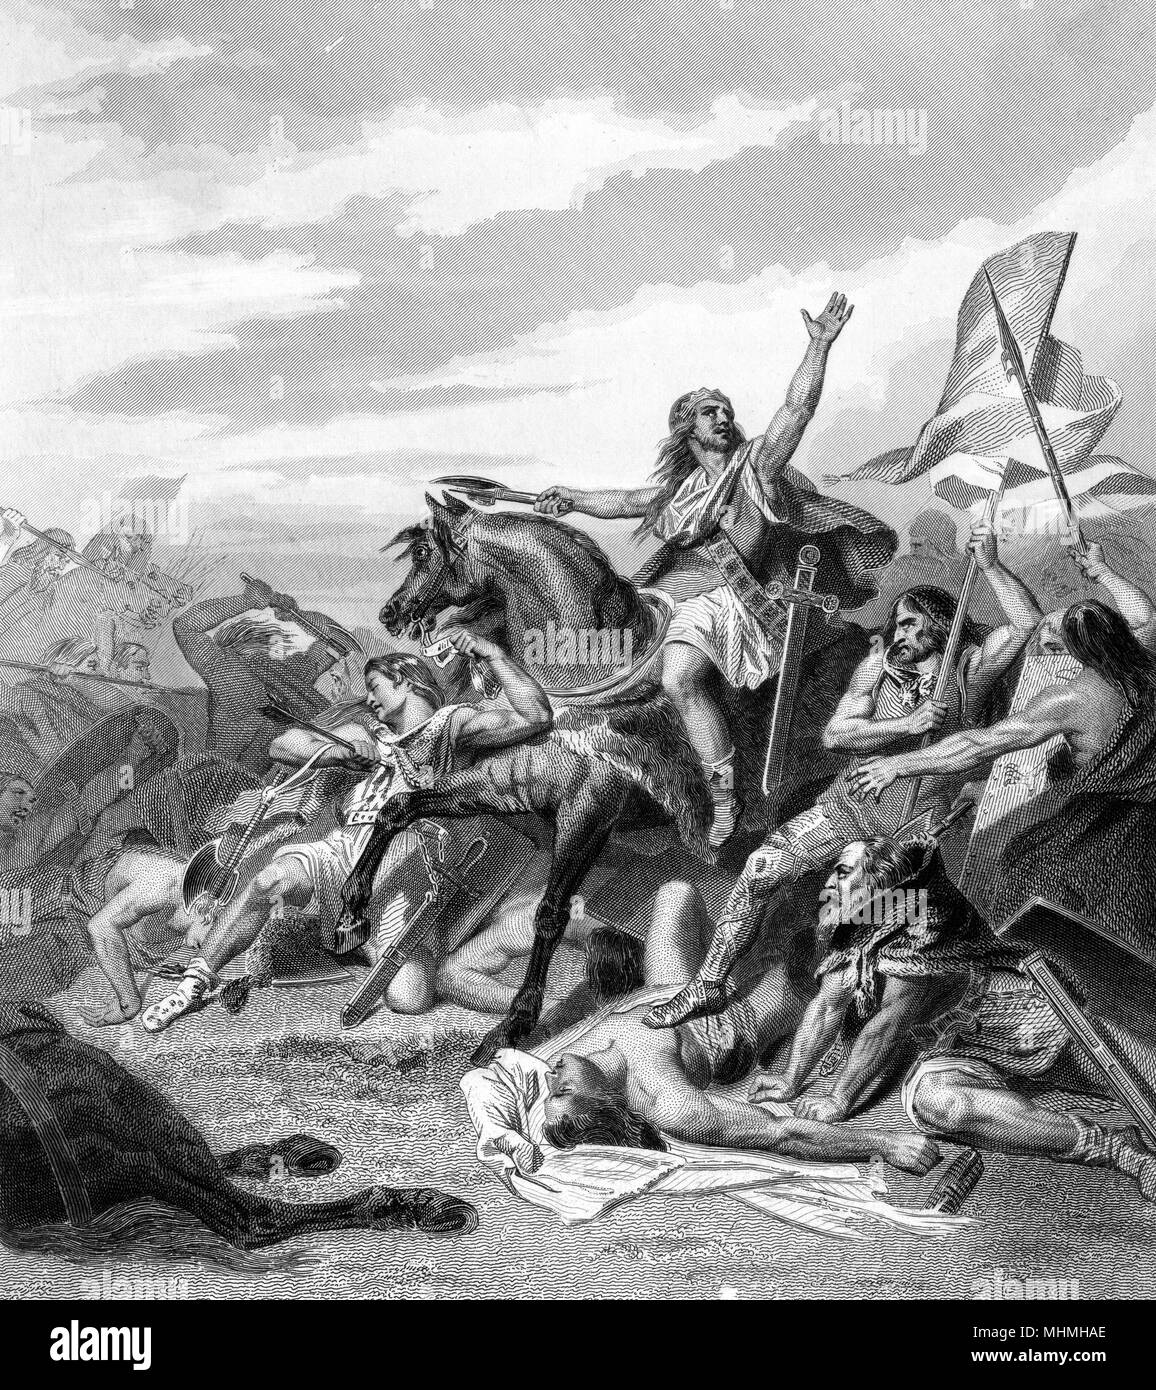 Clovis, Merovingian king of the Franks, defeats the Alemanni at TOLBIAC, near Koln, and consequently converts to Christianity as he promised his wife Clothilde     Date: December 496 Stock Photo